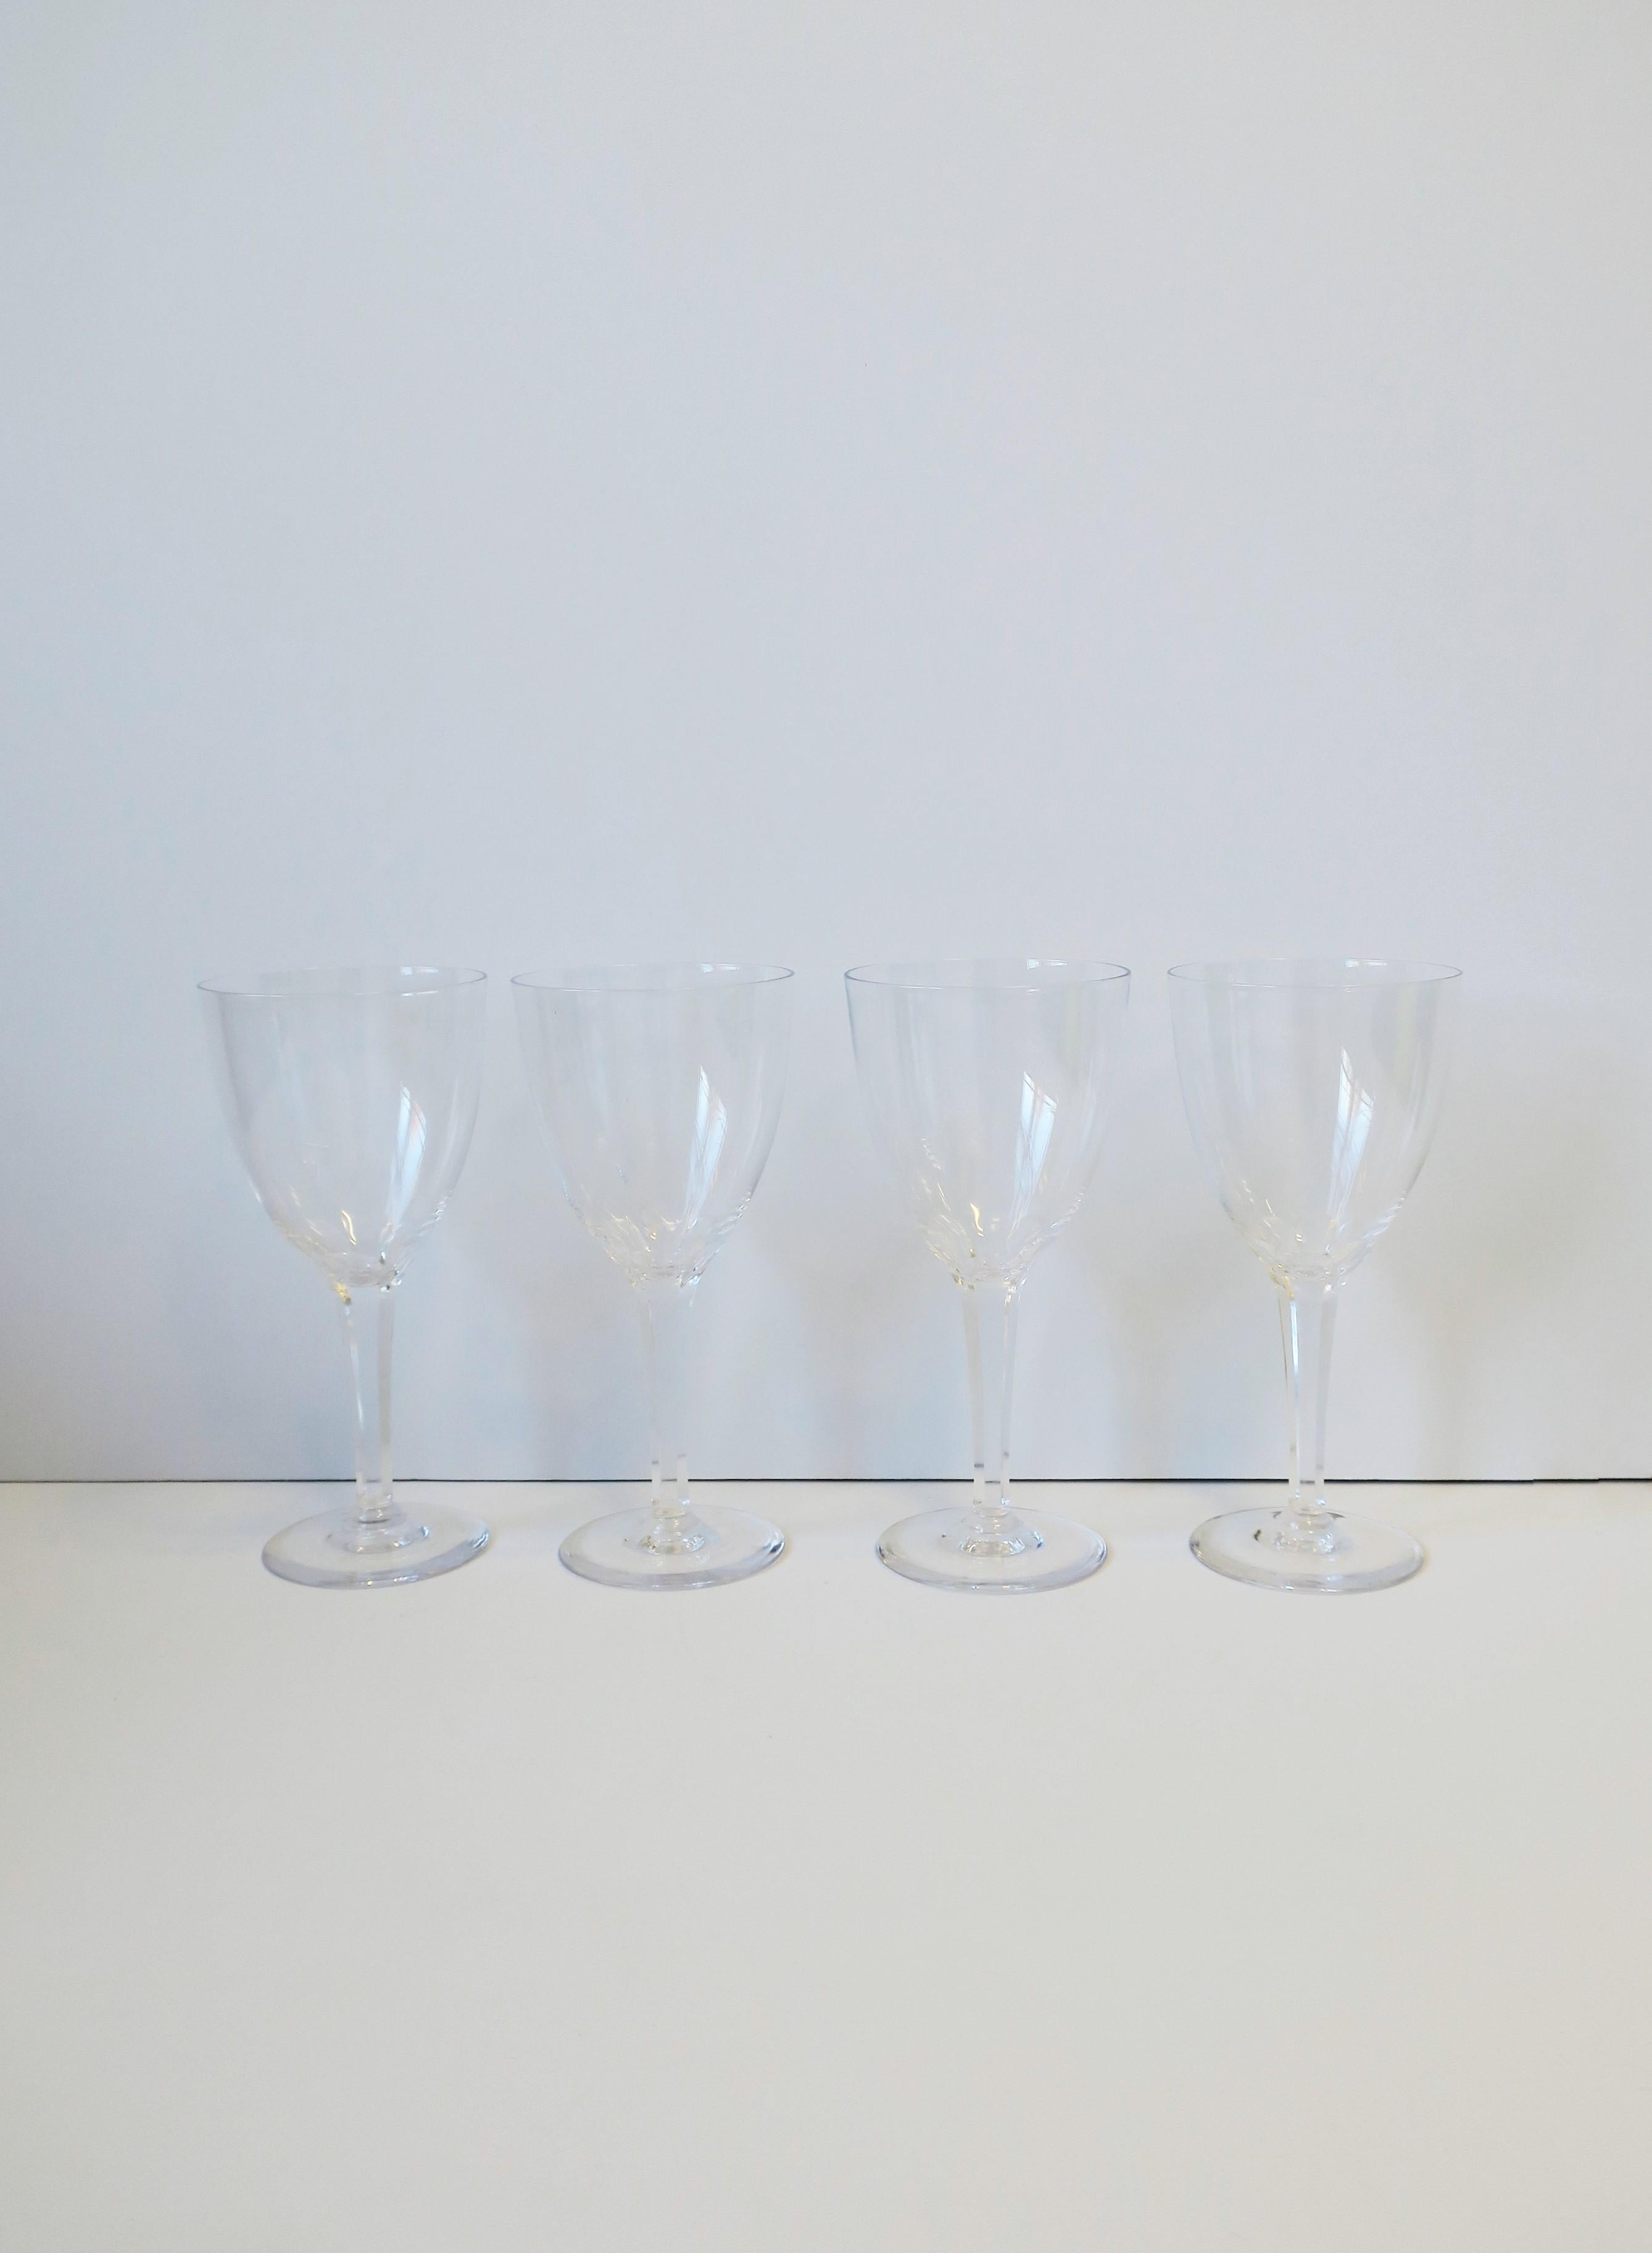 A beautiful set of four (4) rare vintage Kosta Boda crystal wine or water glasses, Midcentury Modern period, circa mid-20th century, Sweden. With maker's mark etched 